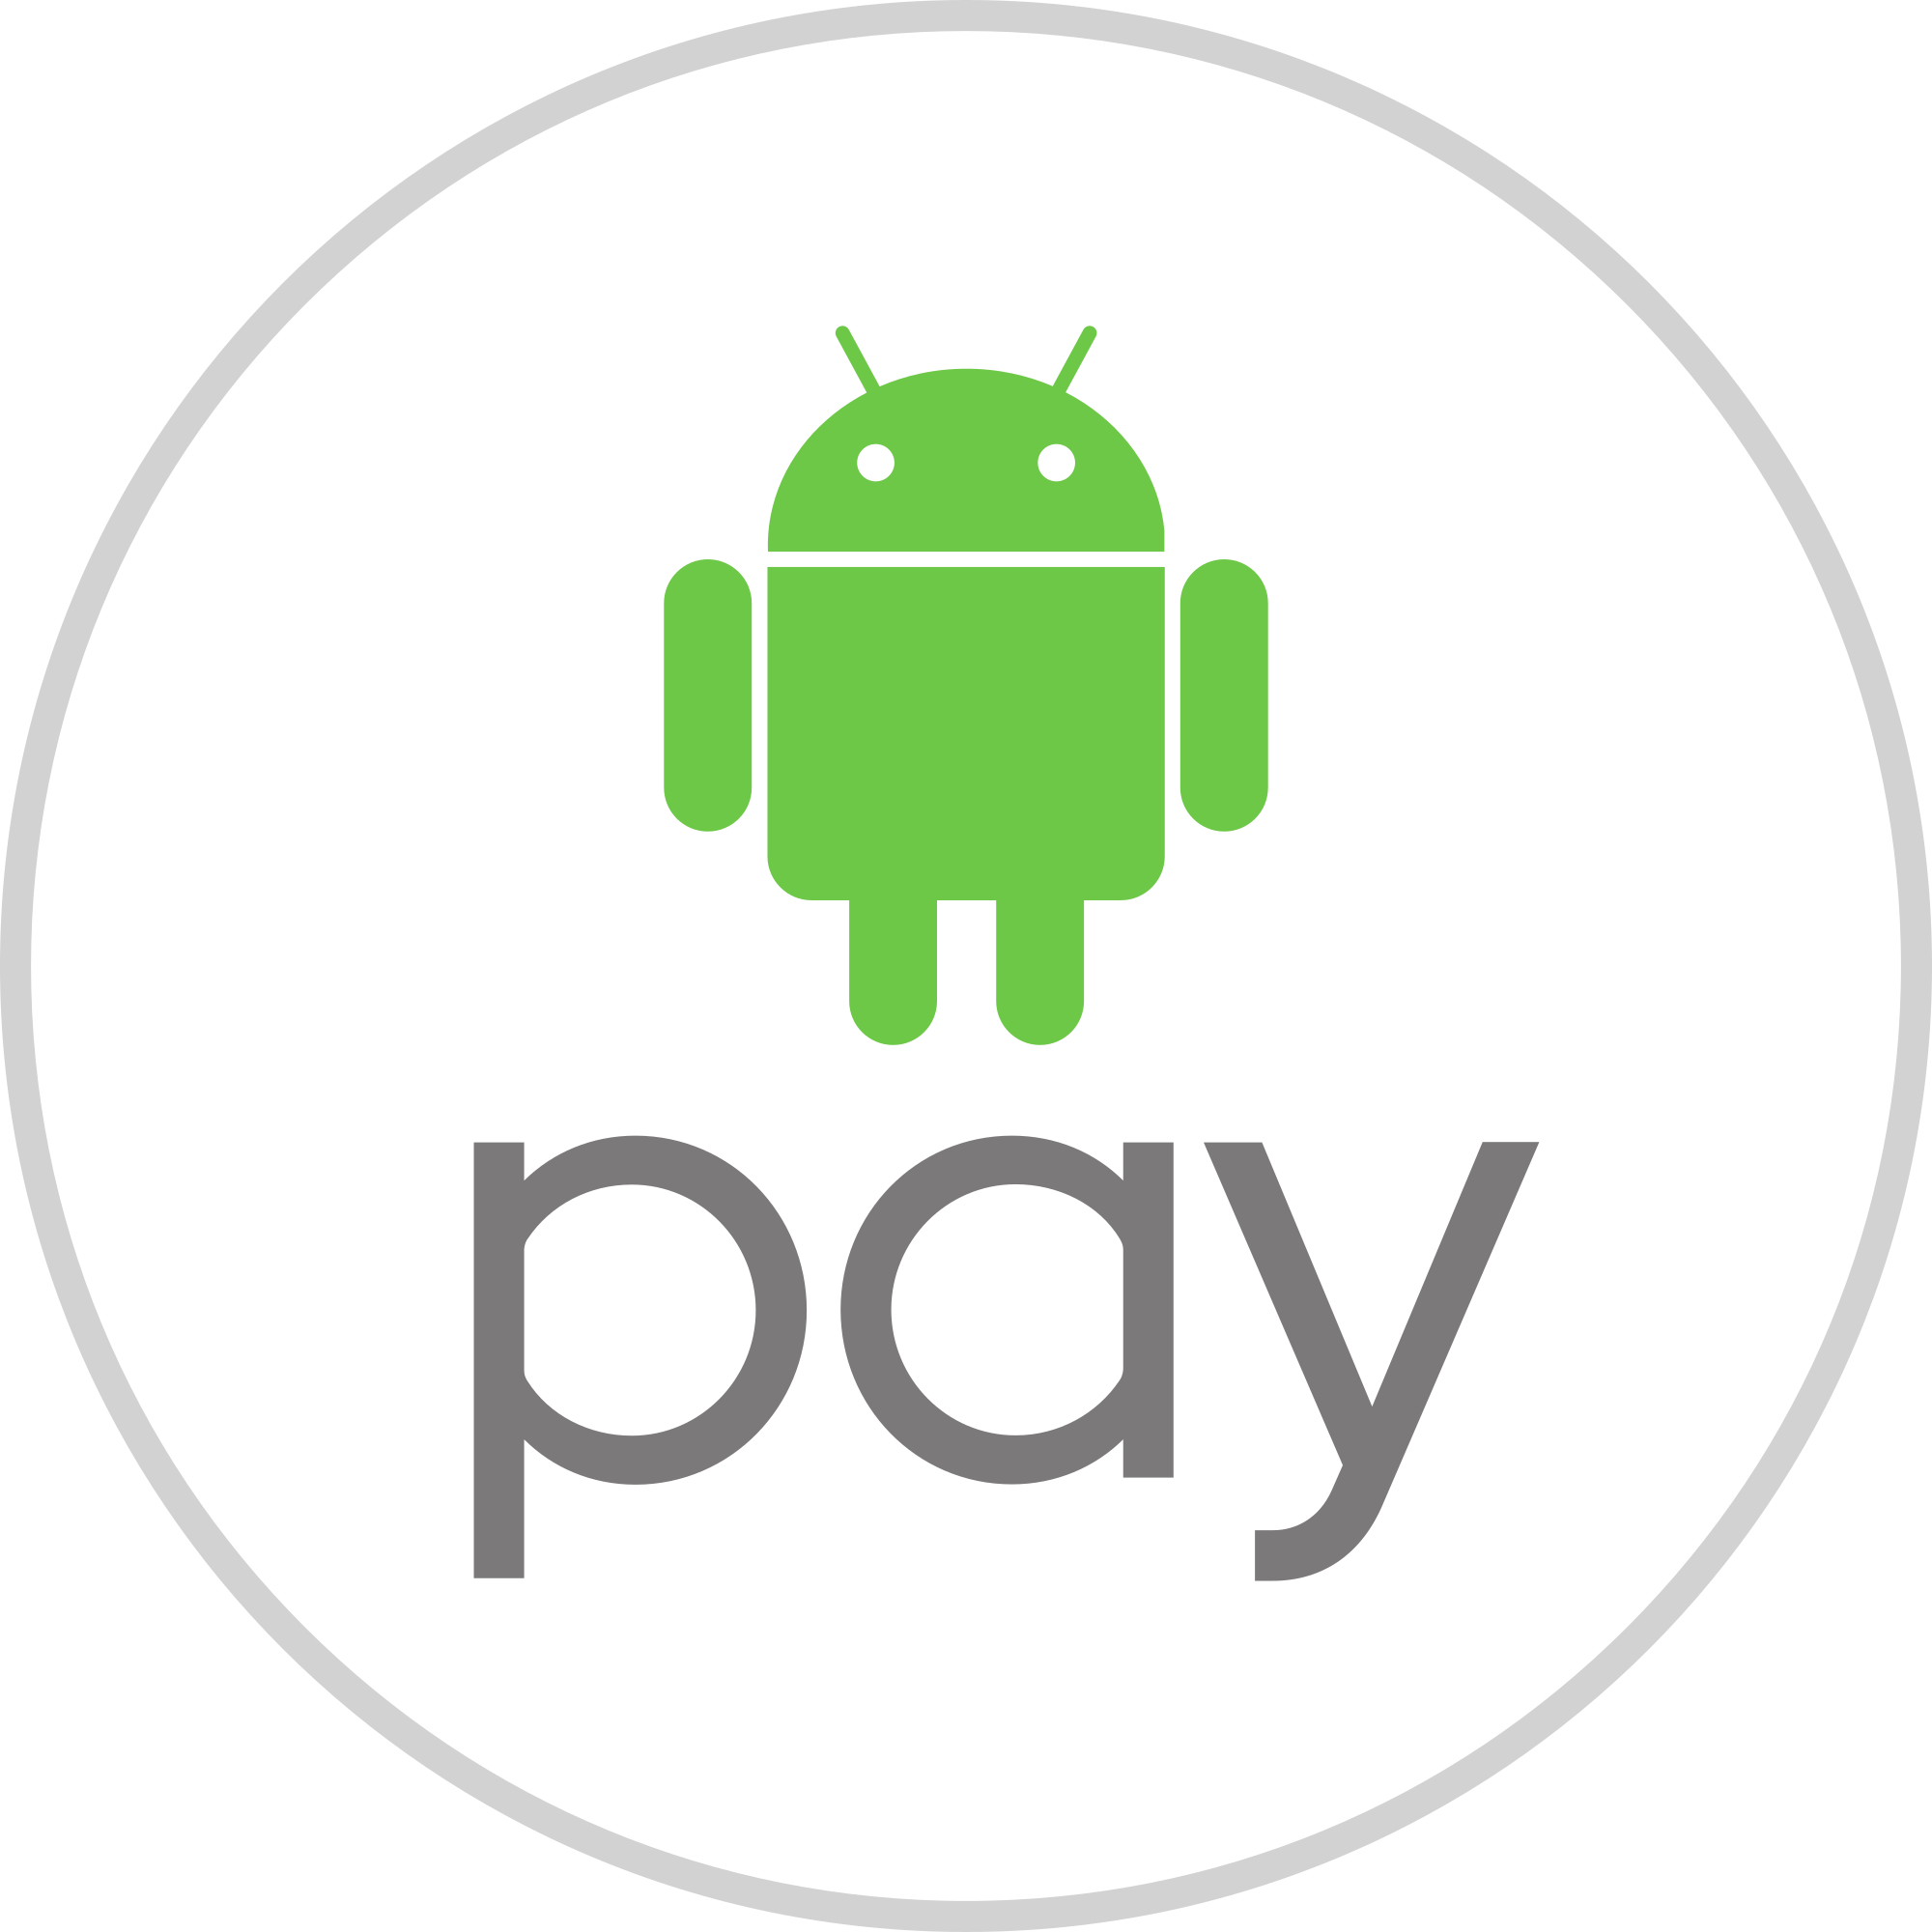 Apple or Android Pay Logo - File:Android Pay logo.svg - Wikimedia Commons